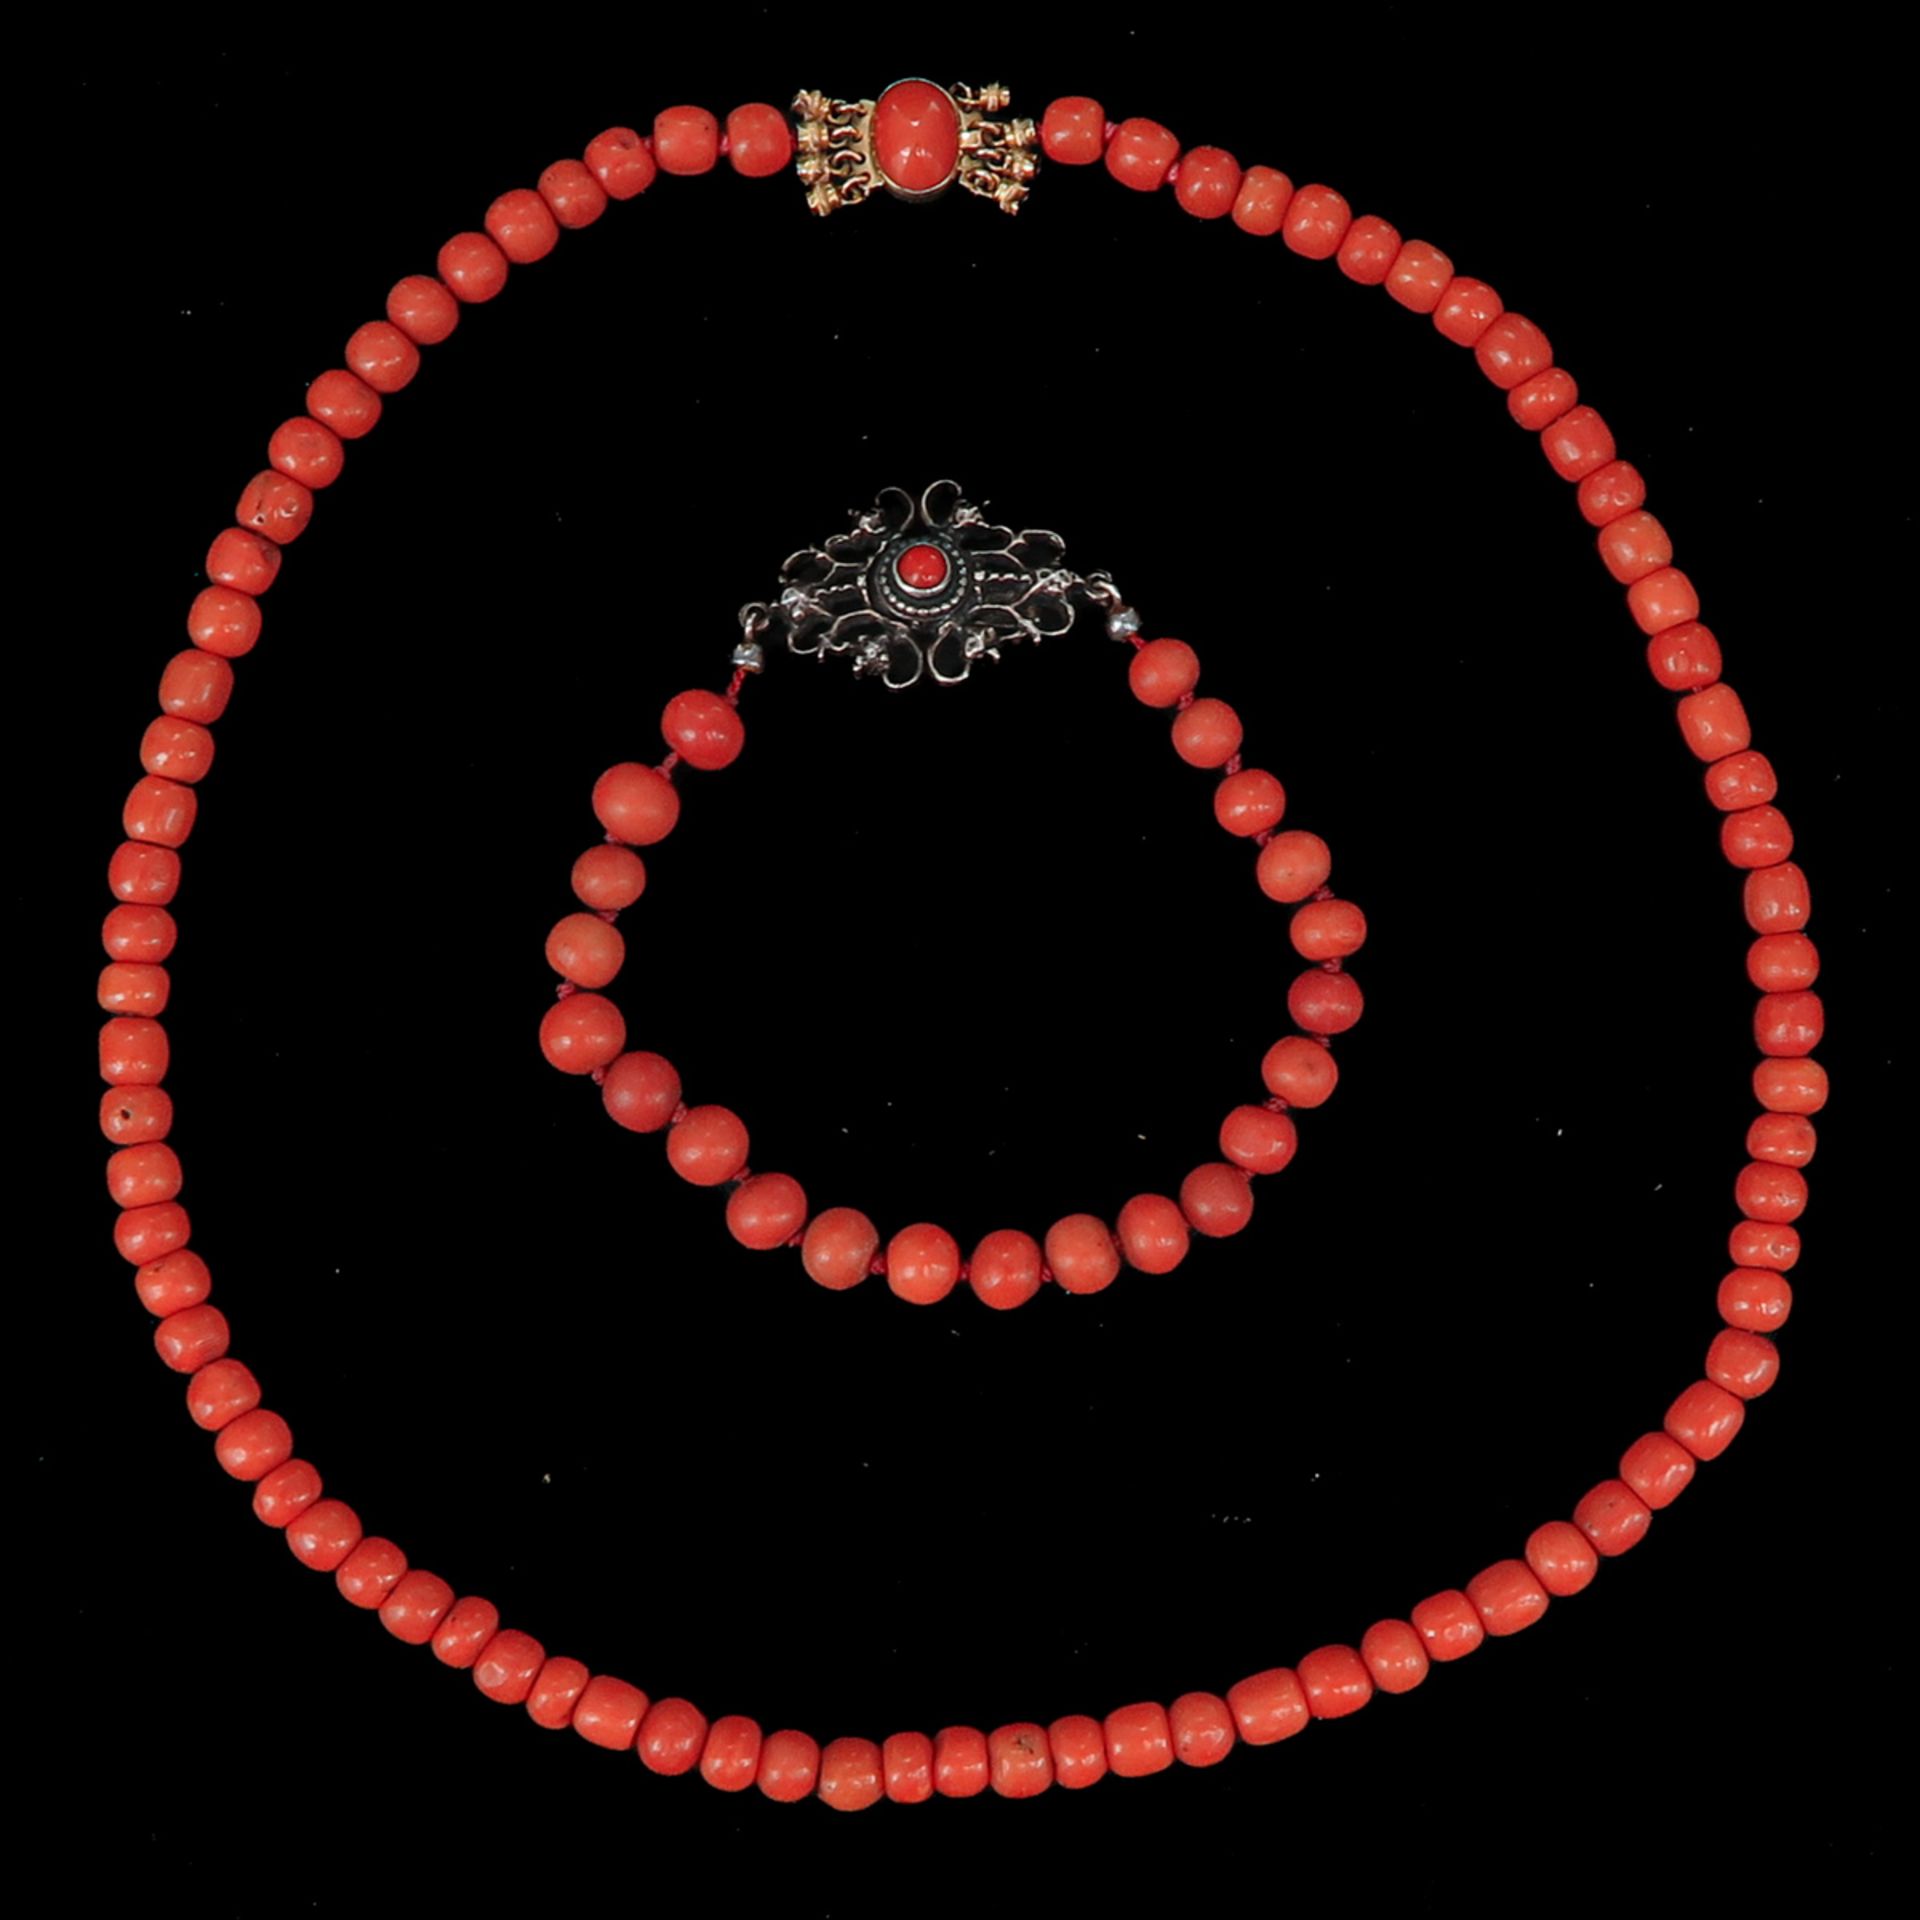 A Red Coral Necklace and Bracelet